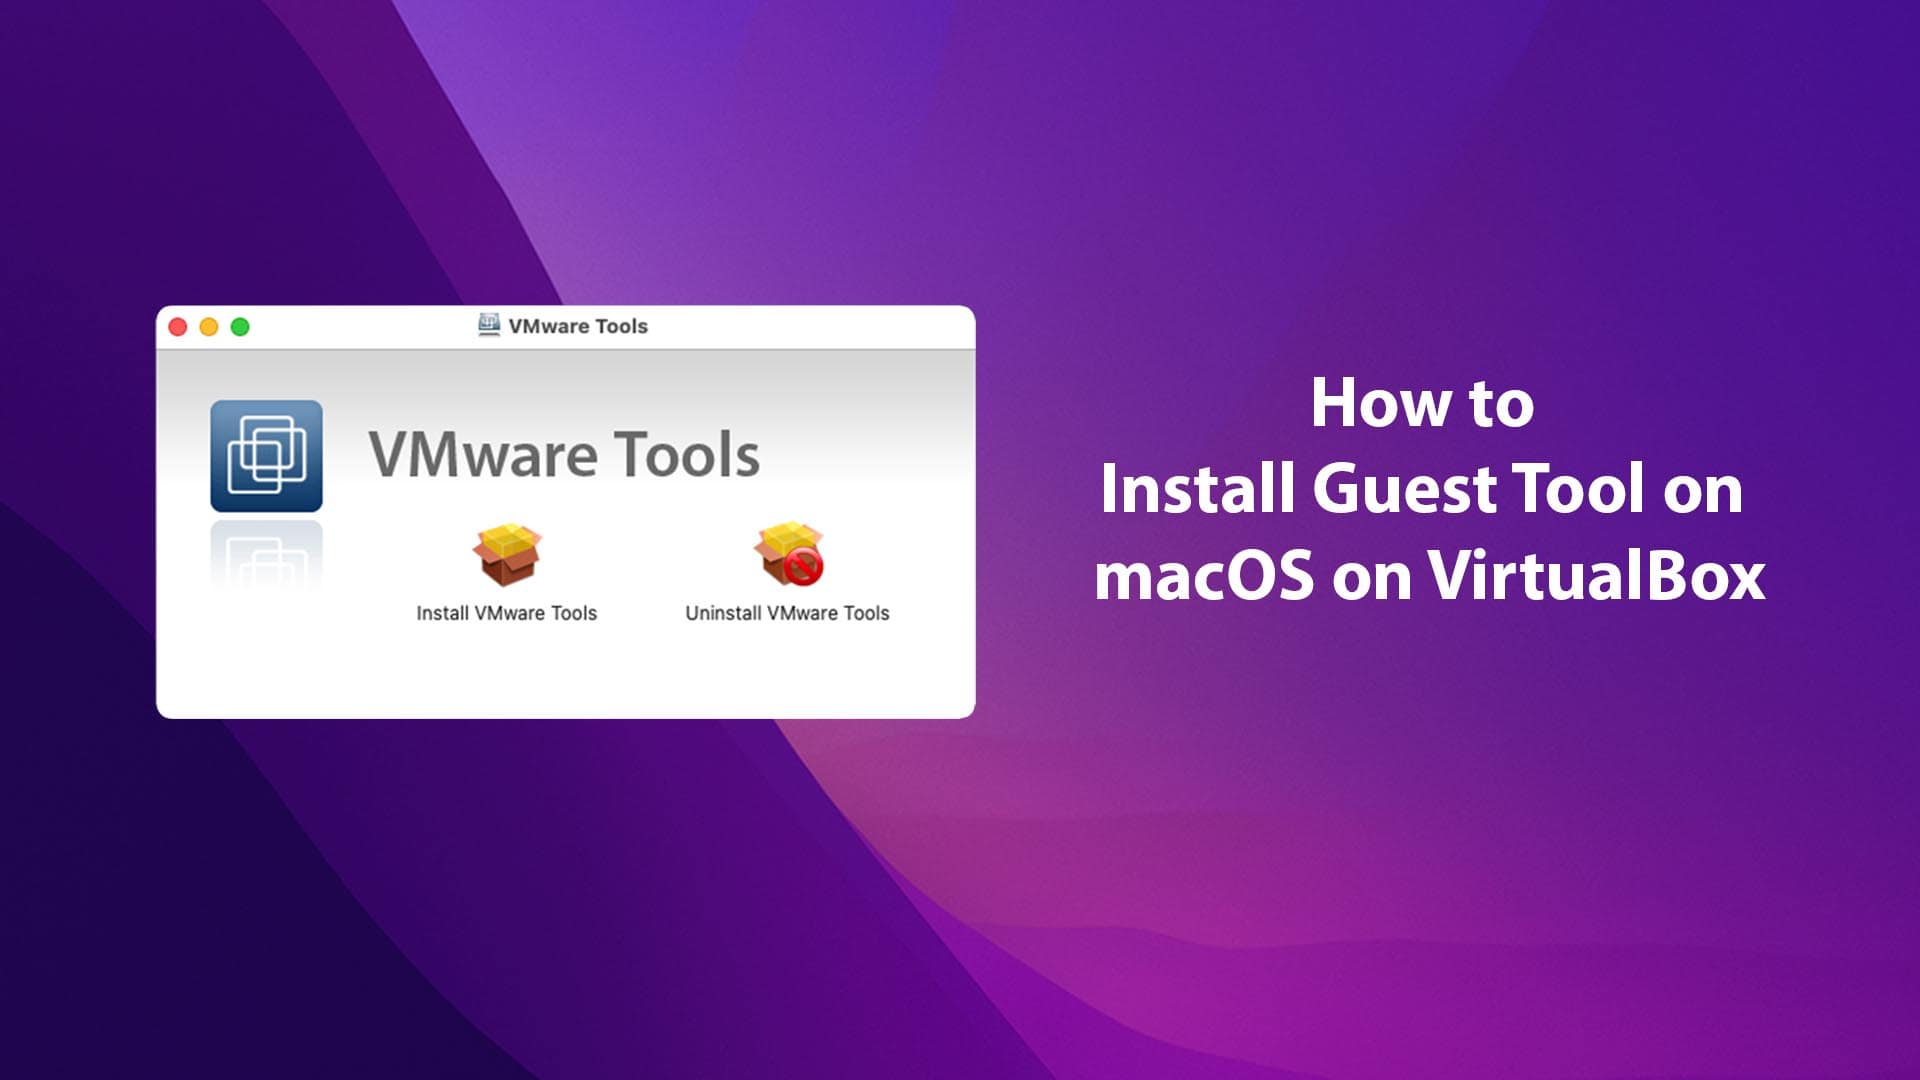 How to Install Guest Tool on macOS on VirtualBox